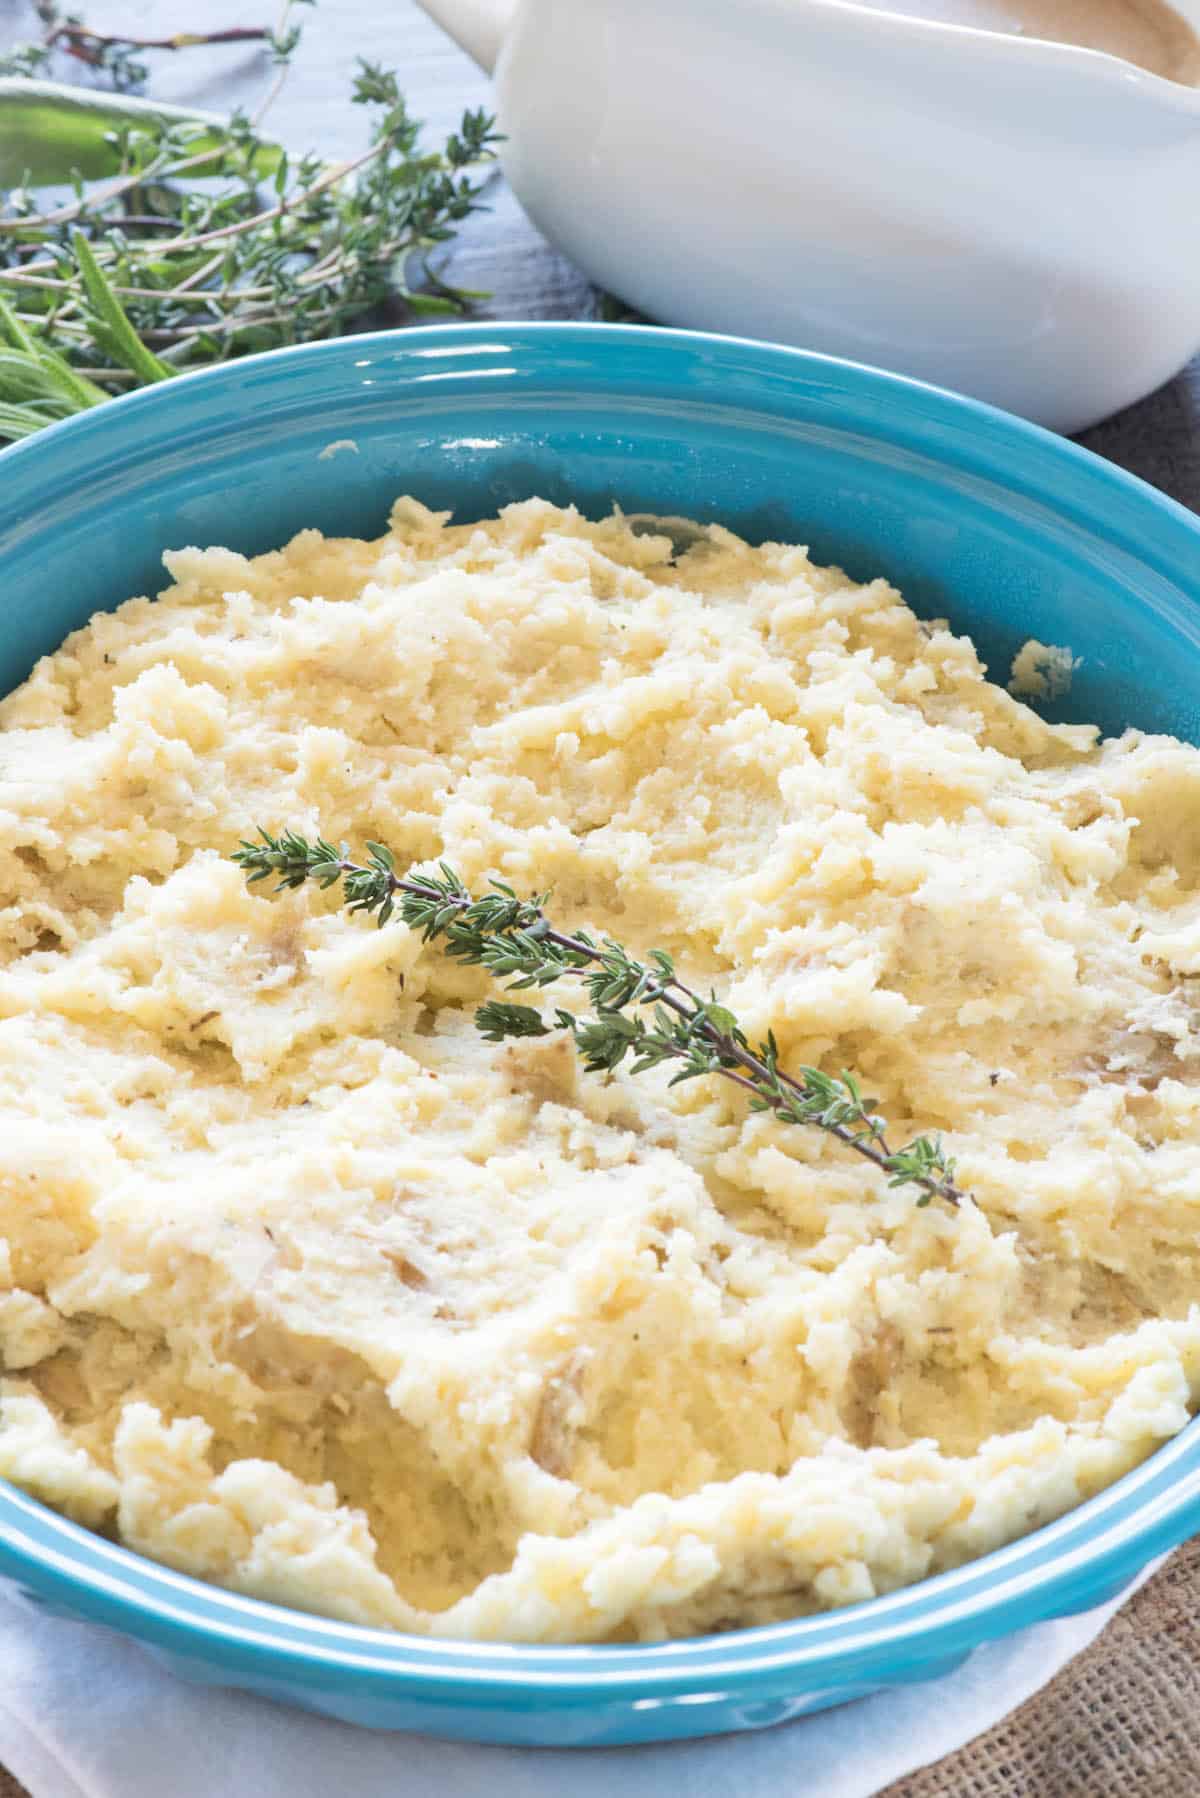 mashed potatoes in a teal blue pan and herbs on top